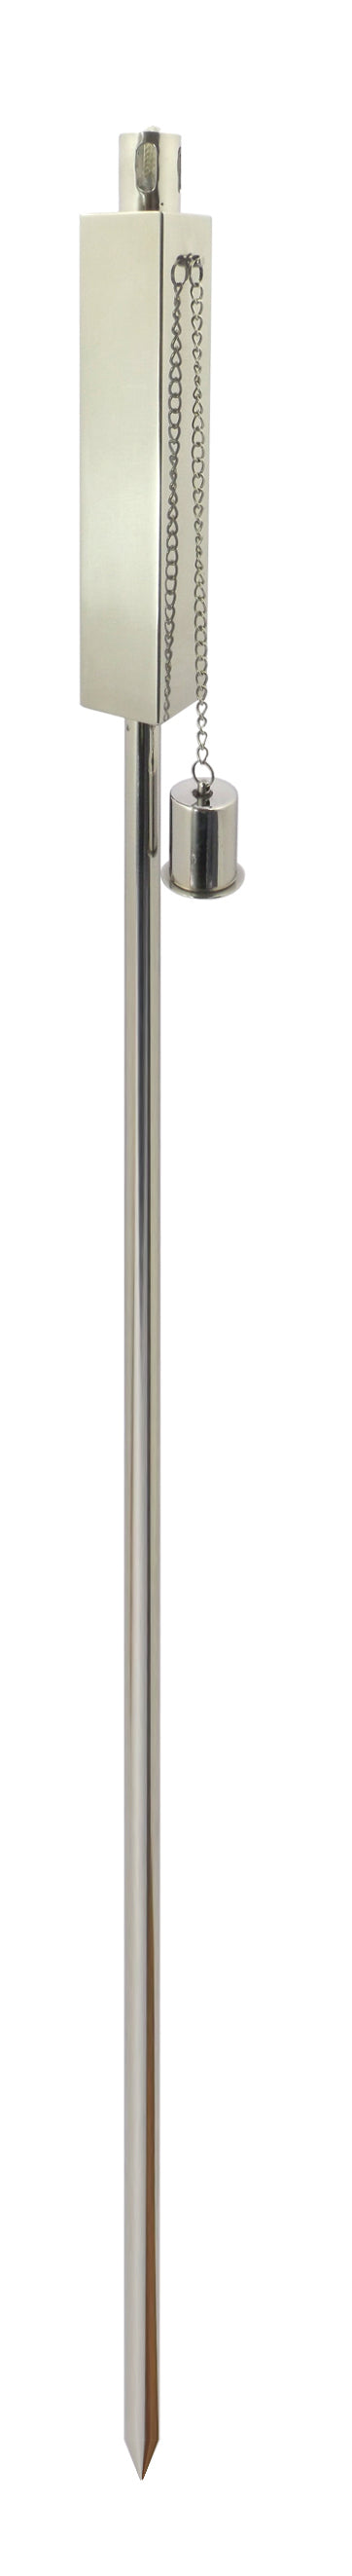 Polished Stainless Steel Garden Torch | 2 pack